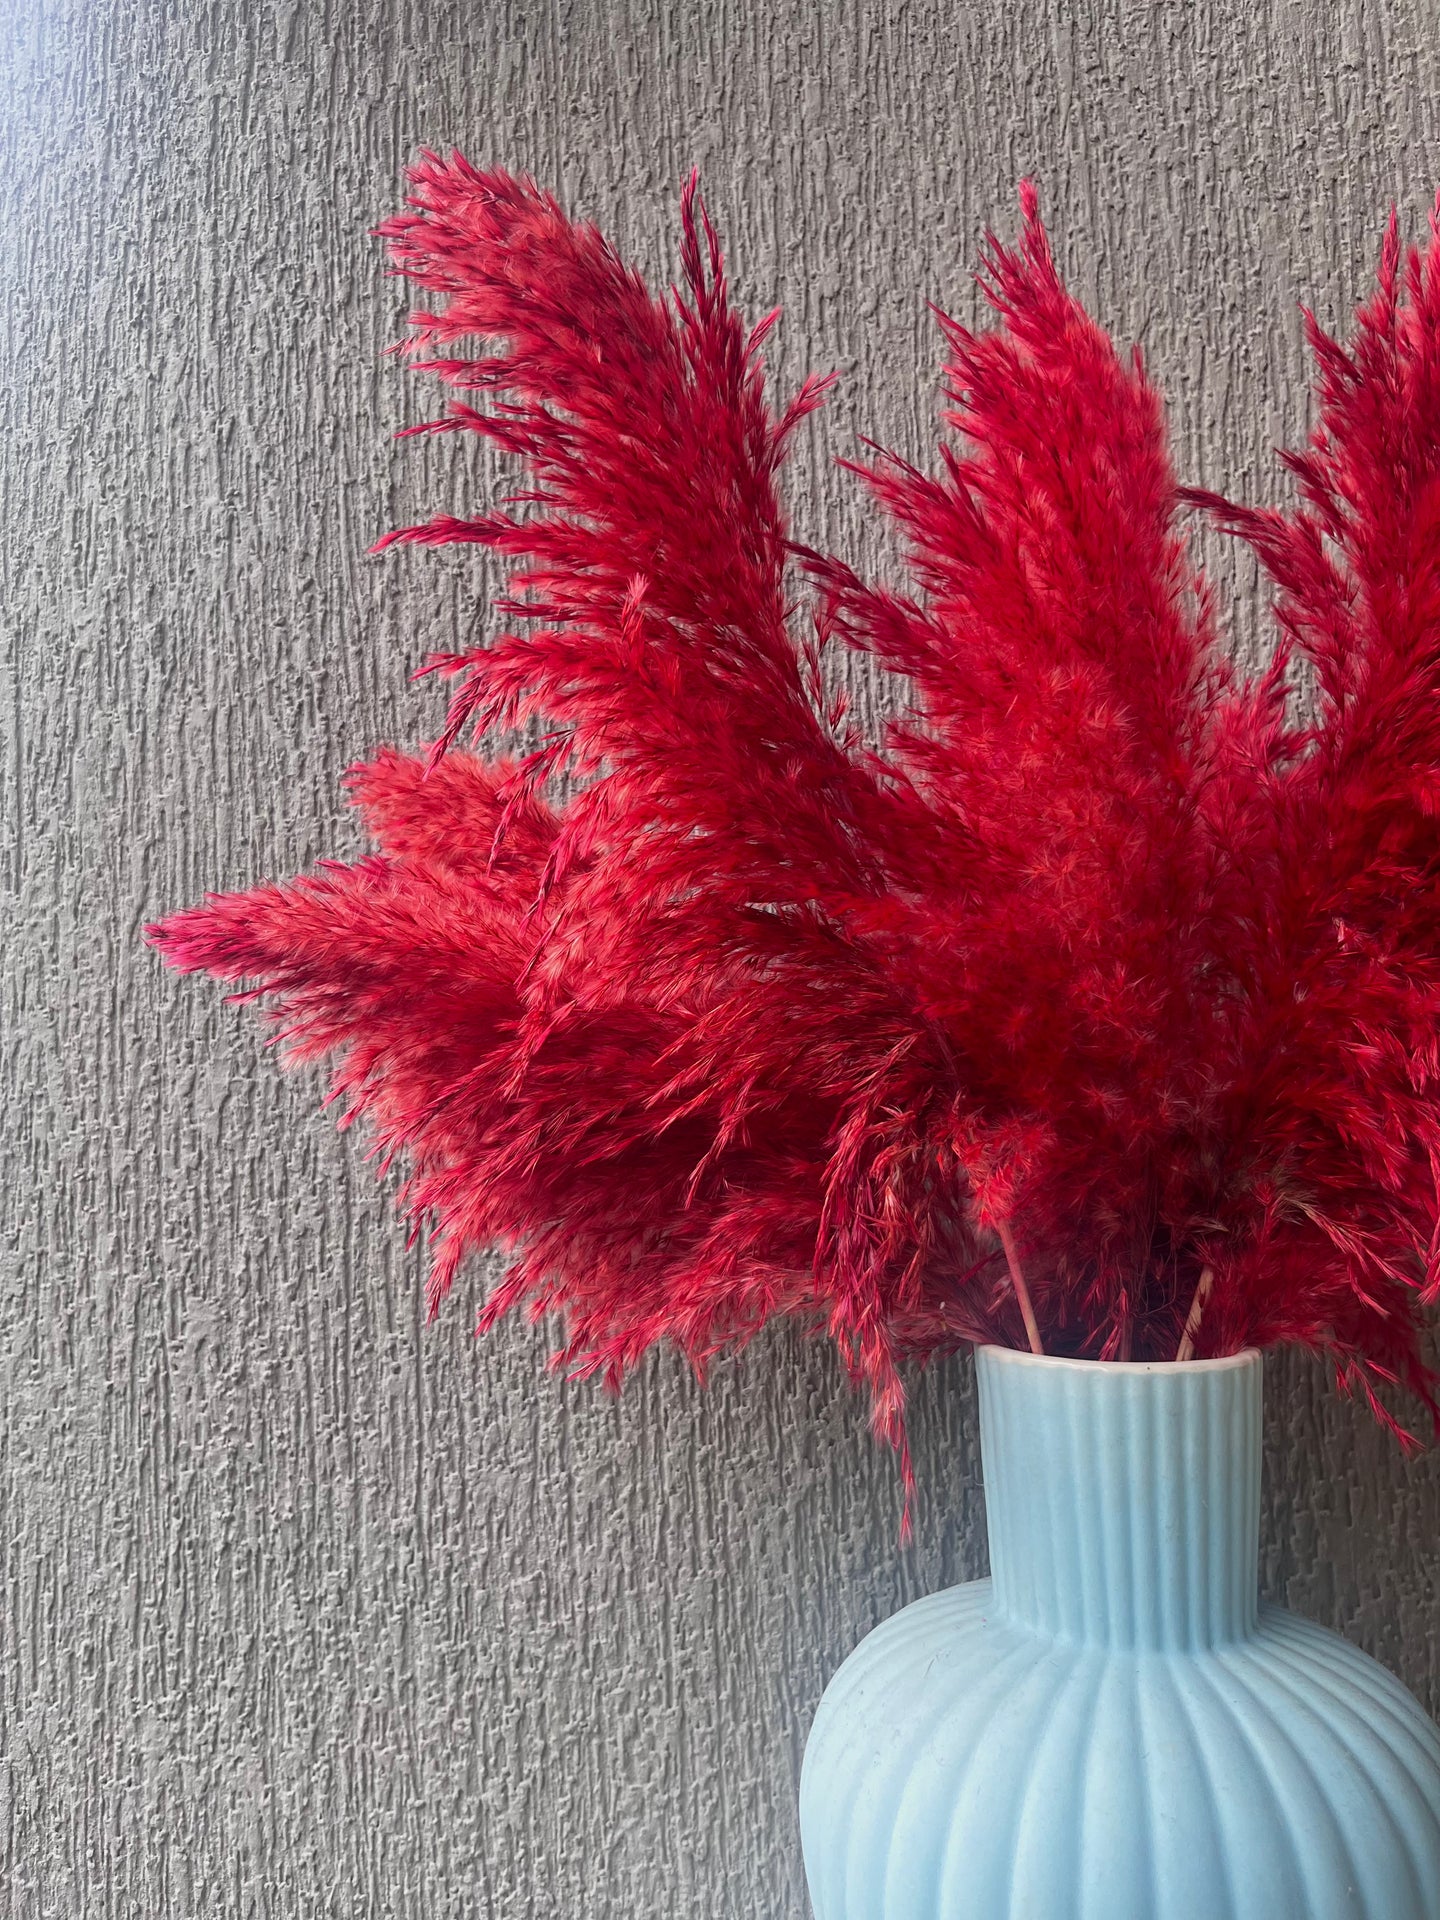 Red Fluffy Pampas